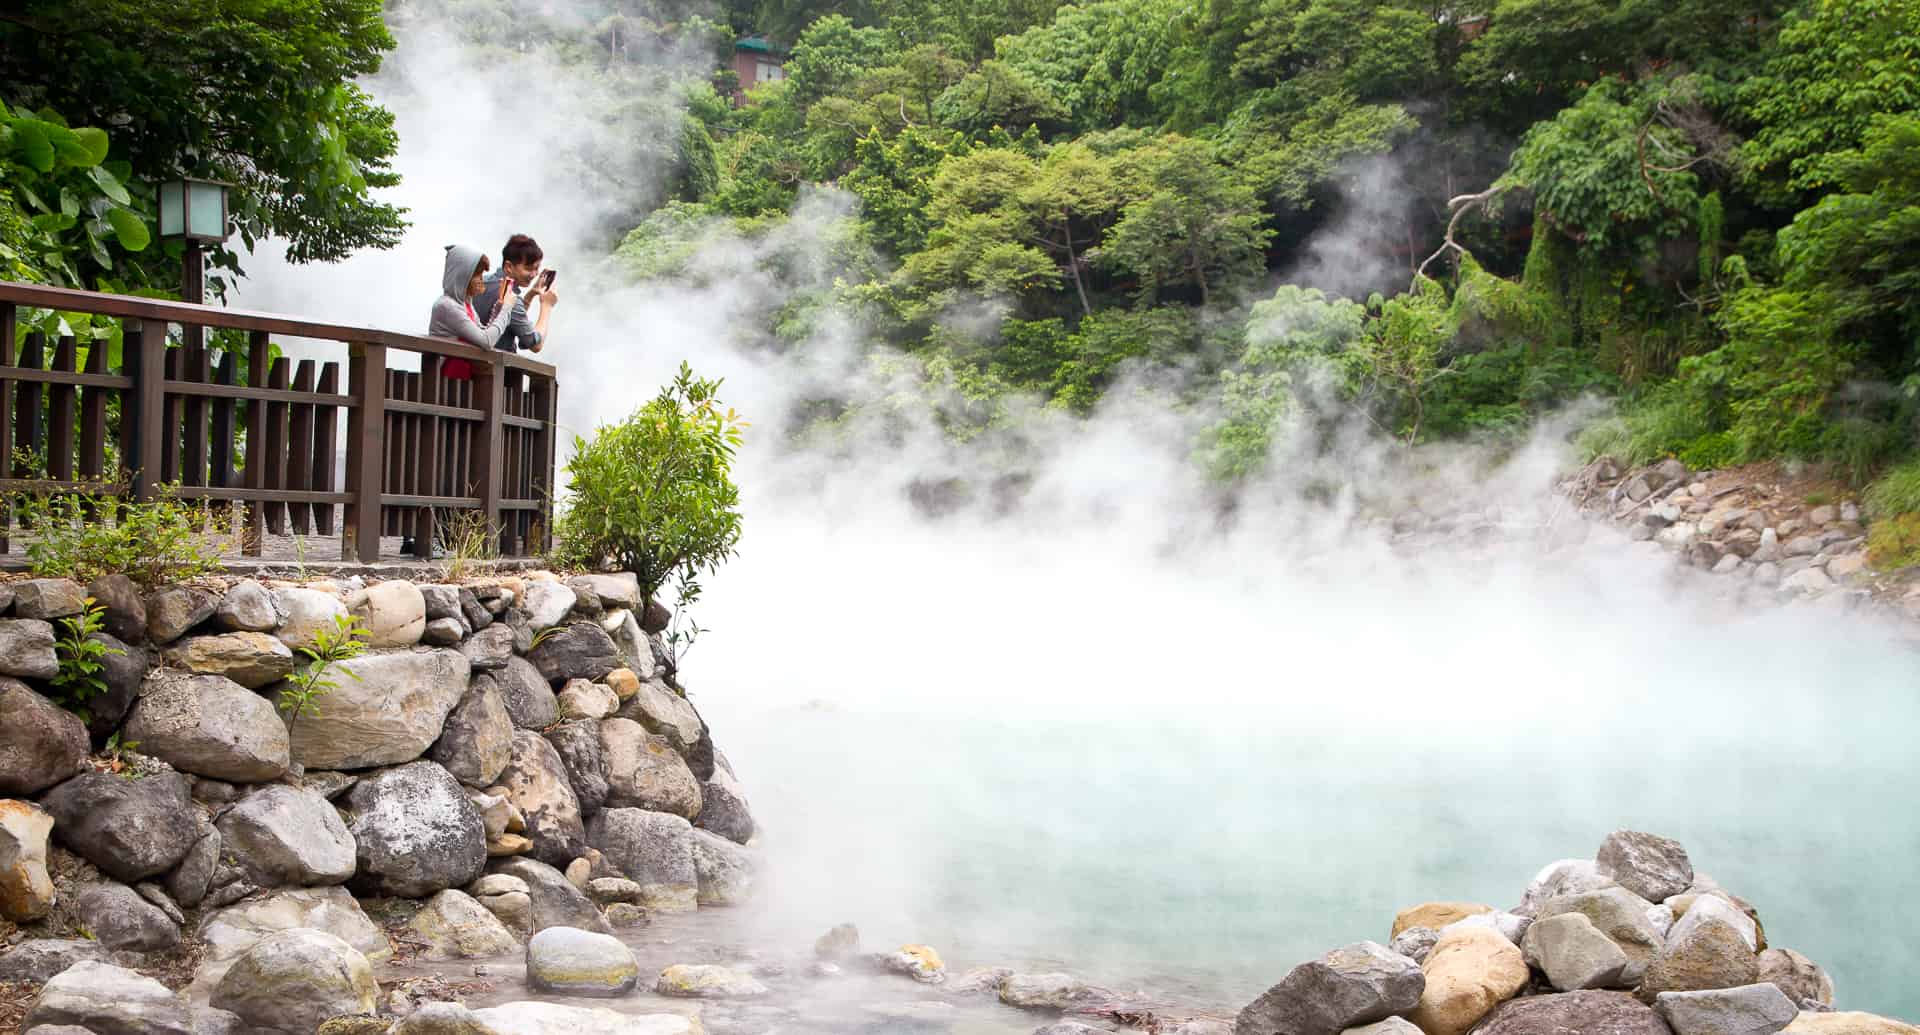 Beitou Hot Spring & Thermal Valley: A Detailed 2022 Guide.